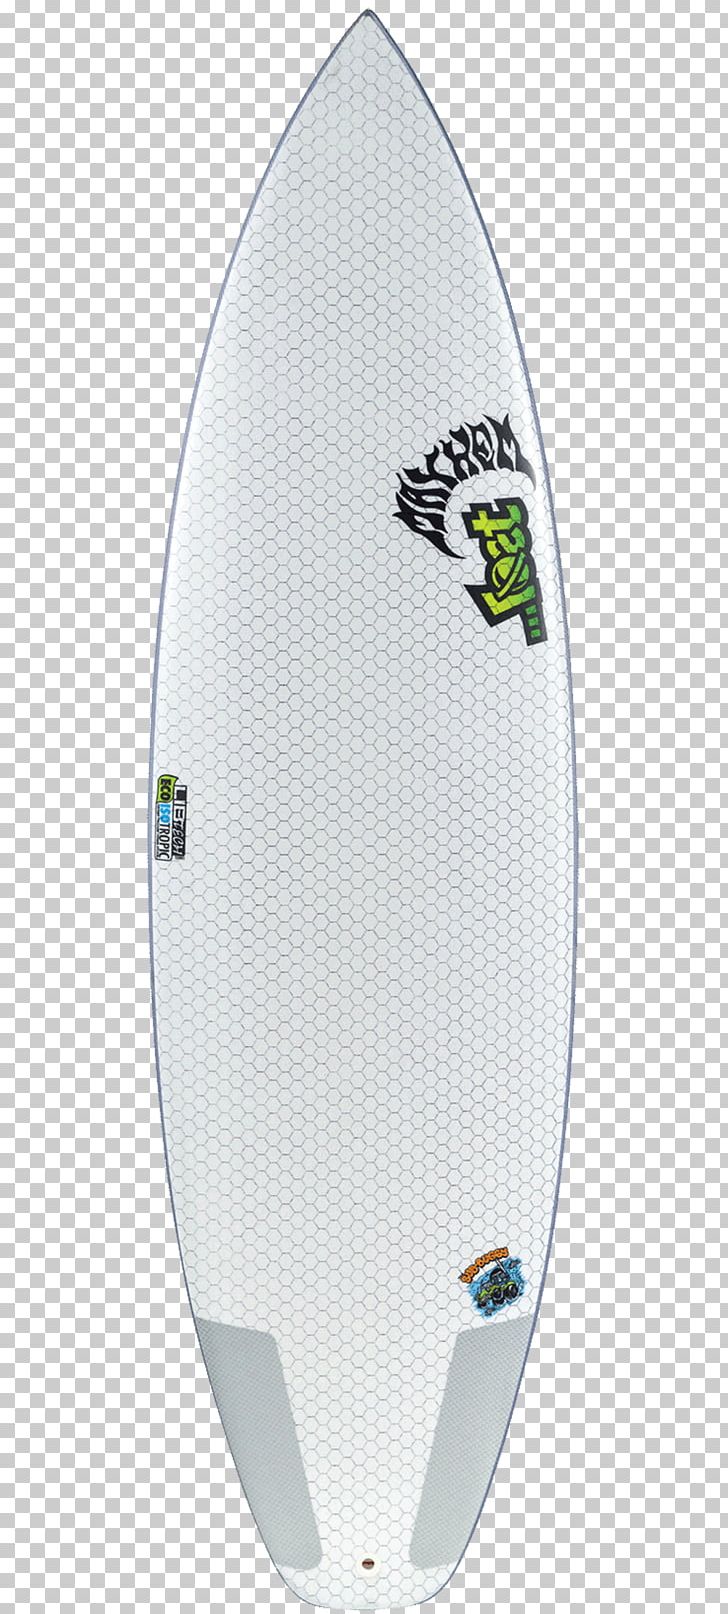 Surfboard Surfing Lib Technologies Shortboard Surf Art PNG, Clipart, Beach, Buggy, Dune Buggy, Fin, Lib Free PNG Download